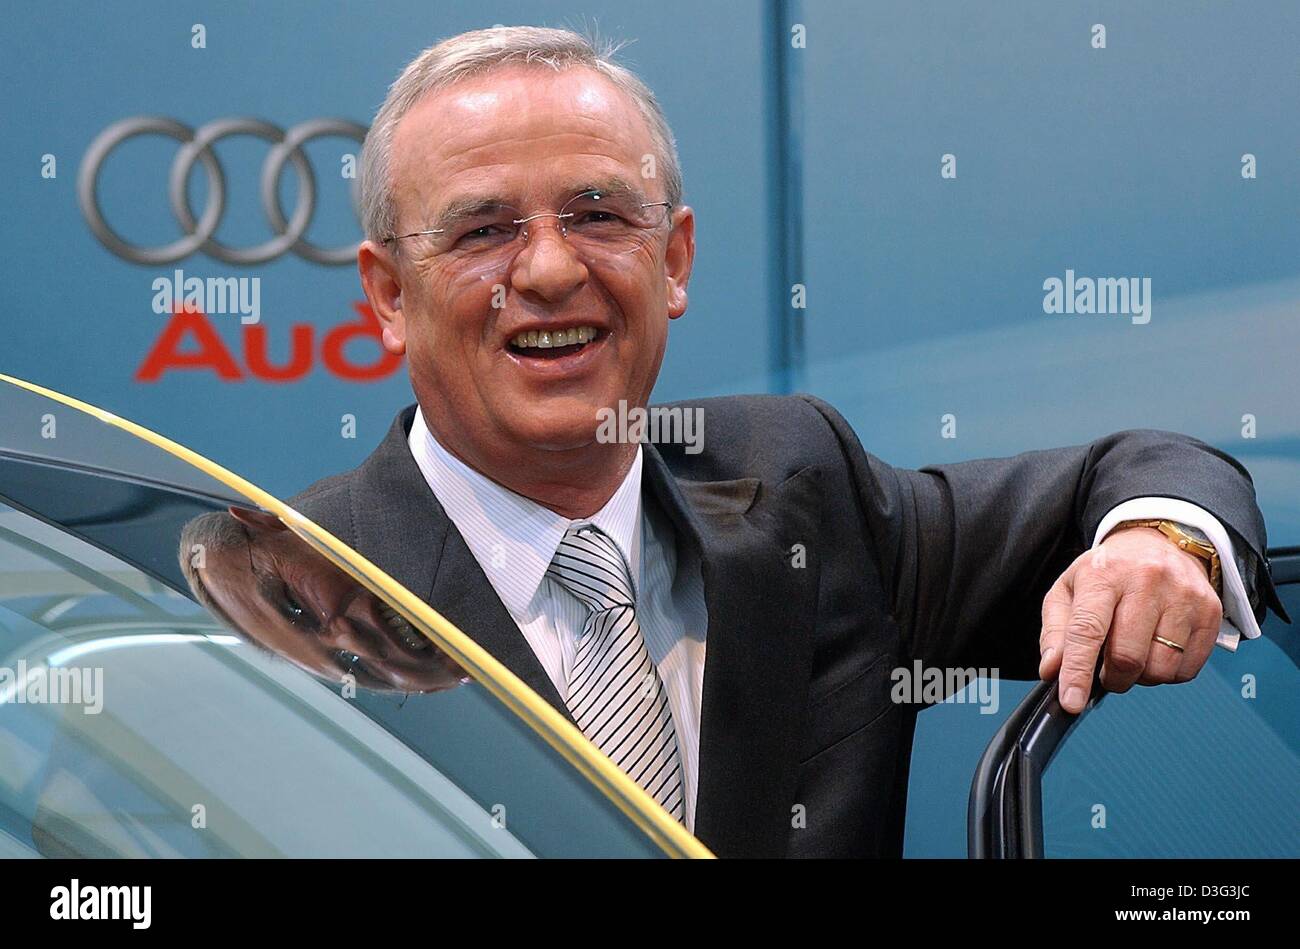 (dpa) - Martin Winterkorn, CEO of car manufacturer Audi, smiles in front of the company logo ahead of the annual results press conference in Ingolstadt, Germany, 25 February 2003. Audi is a subsidiary company of Volkswagen (VW). Audi announced that in 2002 turnover amounted to 22.6 billion Euro, which is a 2.6 per cent increase compared to the year before. After tax profits thus in Stock Photo